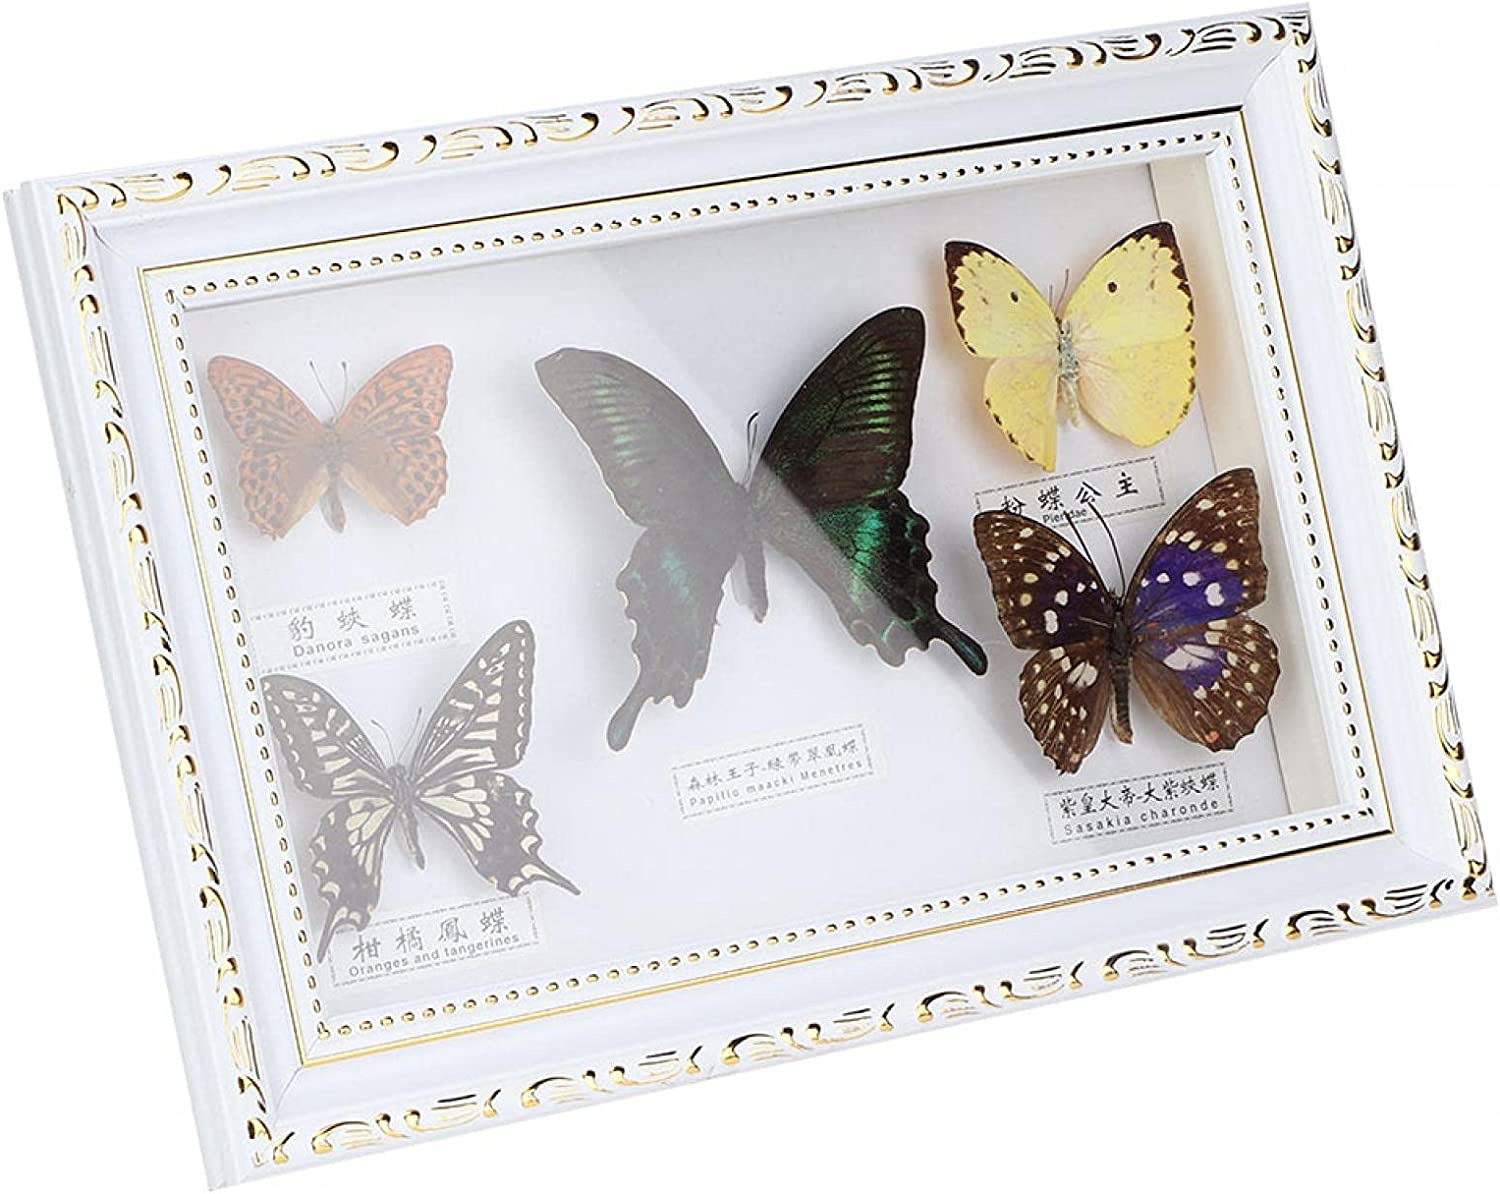 Real Framed Butterfly, Butterfly Specimen Display with Black and White Frame Tax